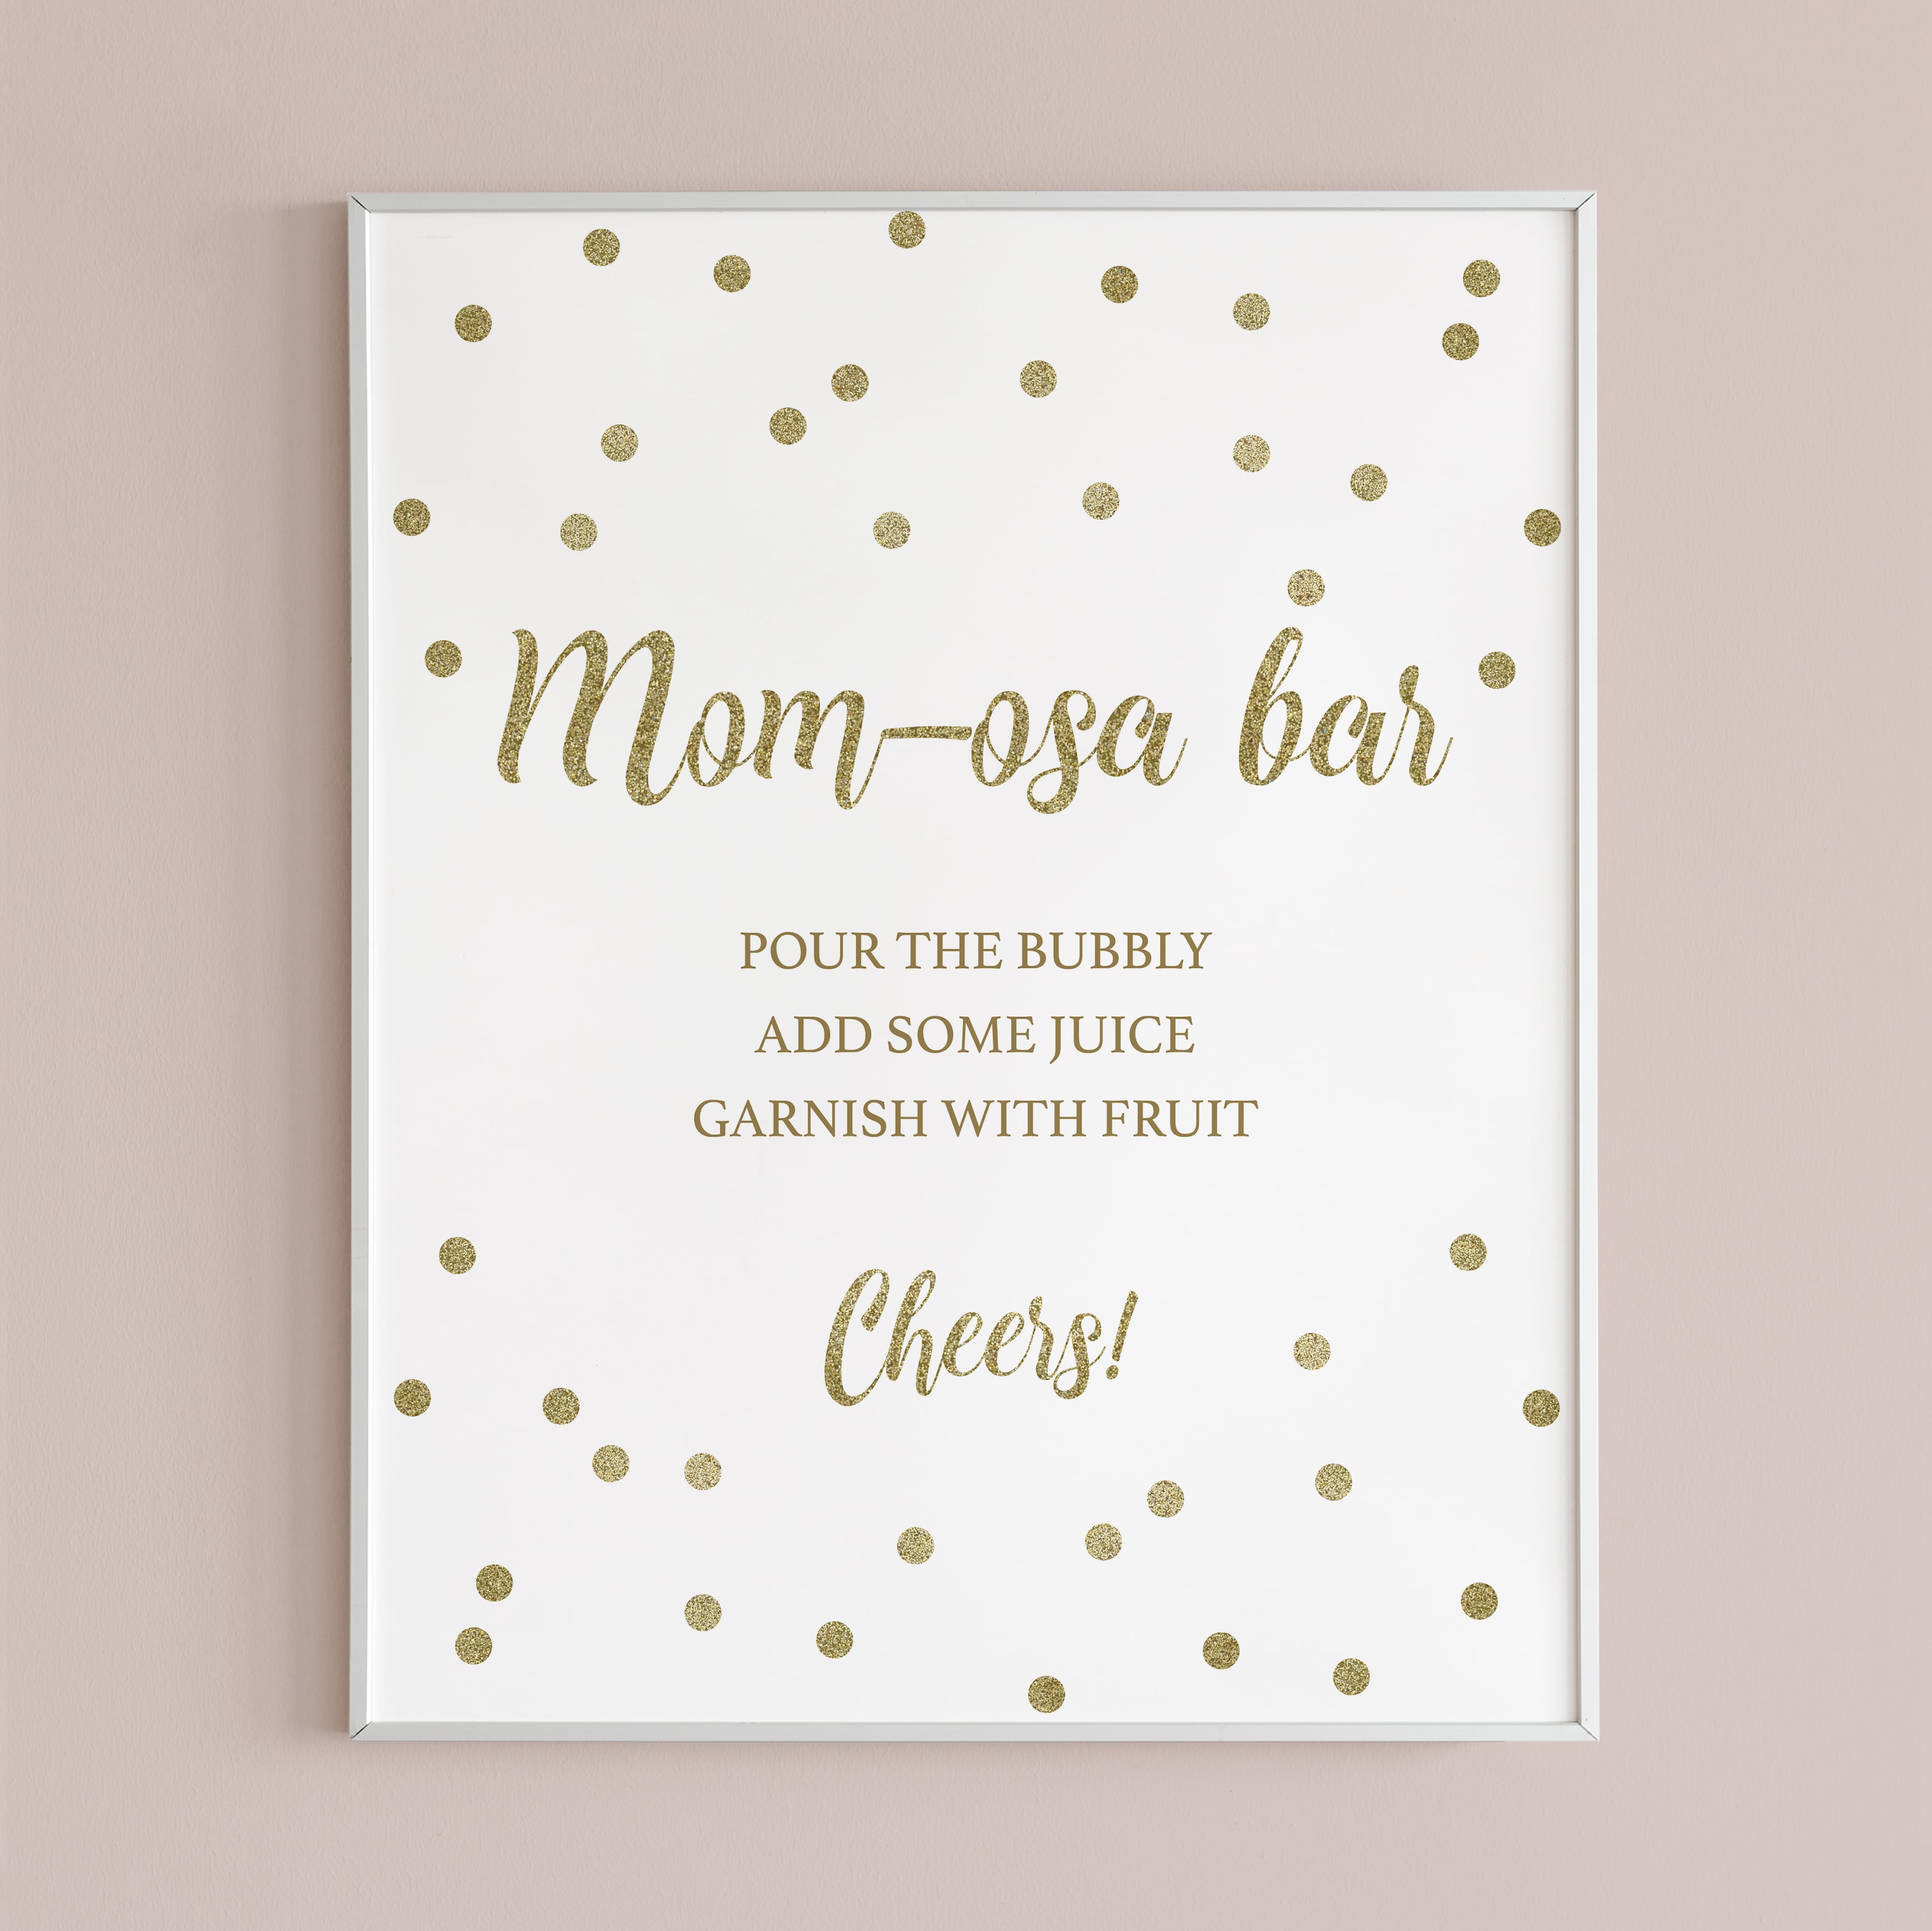 Gold baby shower decorations printable momosa bar sign by LittleSizzle